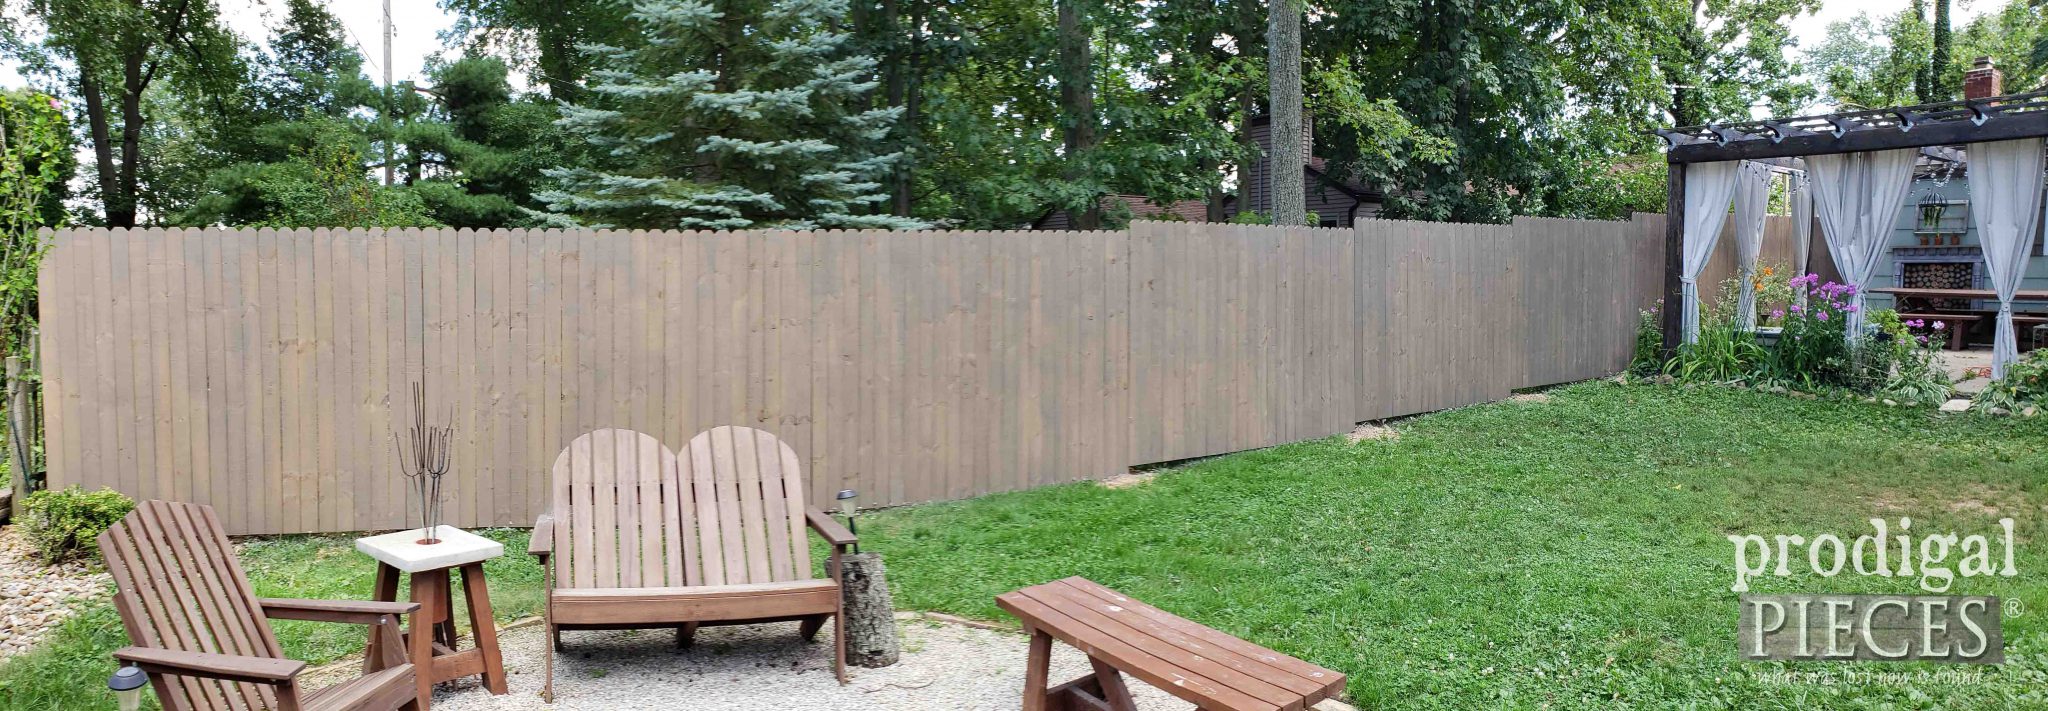 DIY Privacy Fence Finished with Boot Hill Gray Semi-Transparent Stain by Behr | Video tutorial by Larissa of Prodigal Pieces | prodigalpieces.com #prodigalpieces #diy #home #homeimprovement #outdoor